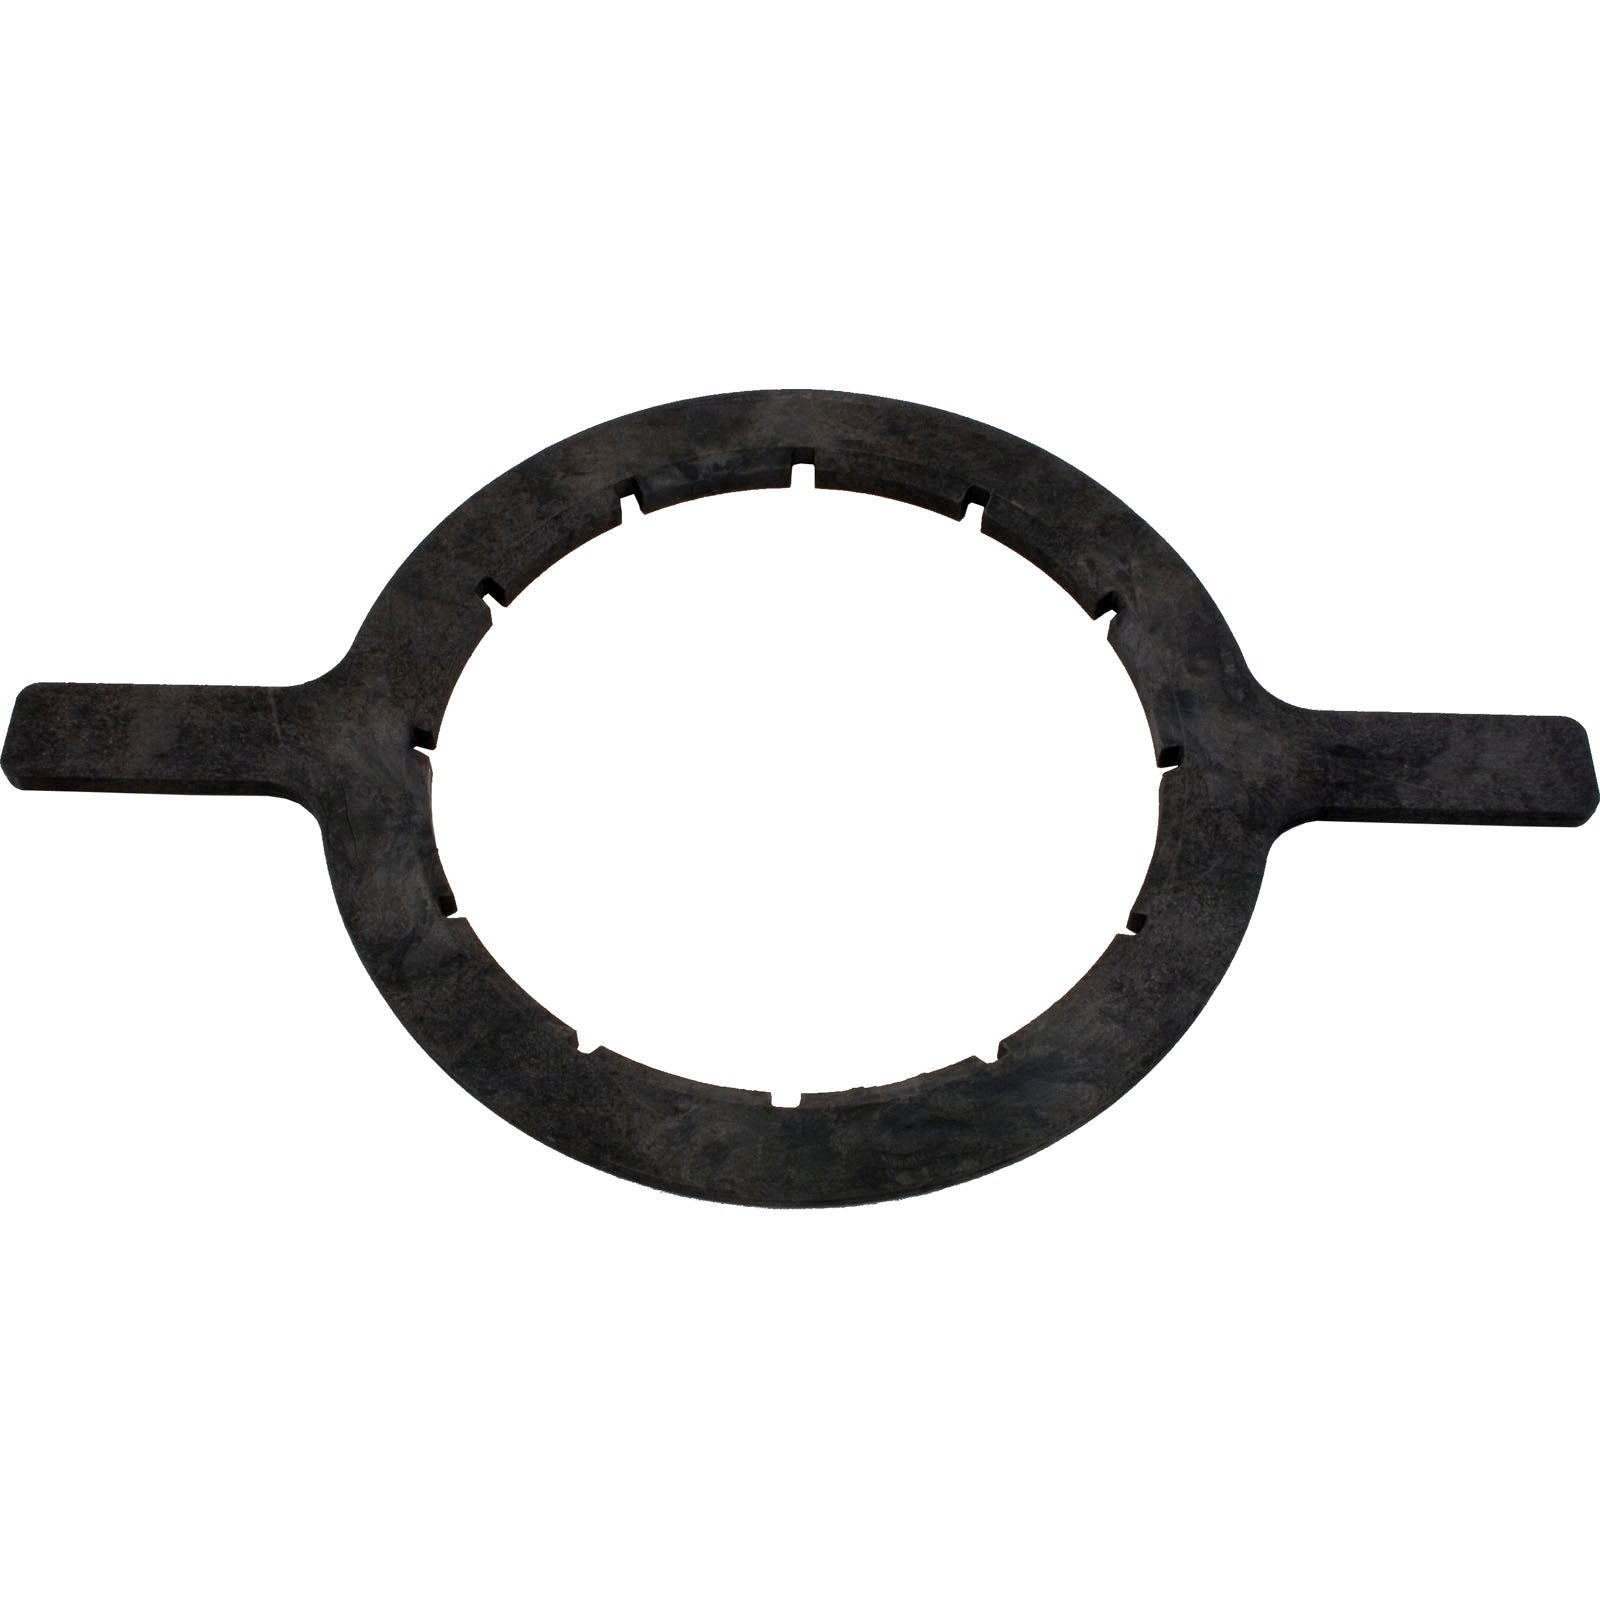 8-1/2" Trap Lid Wrench/ 154527